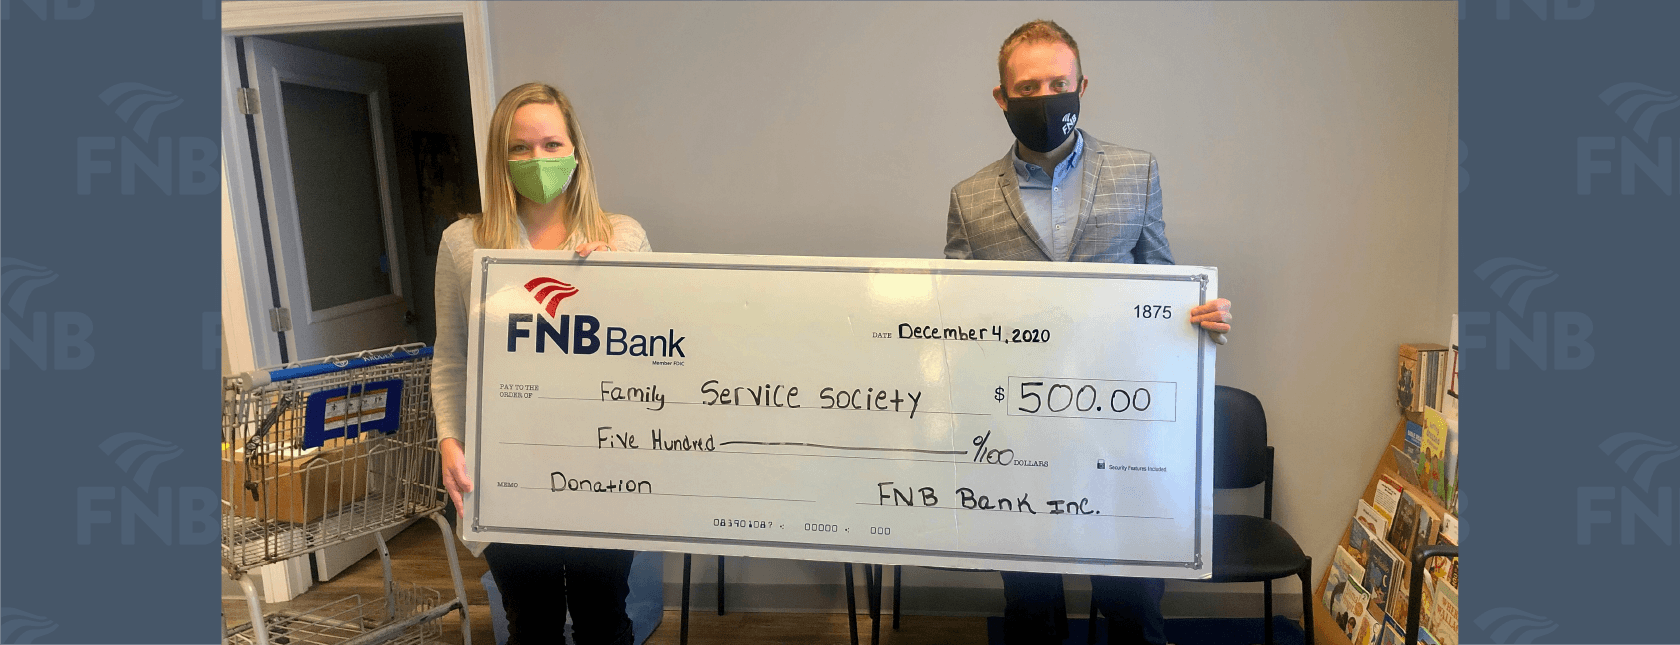 FNB Makes $500 Christmas Donation to Family Service Society of Paducah